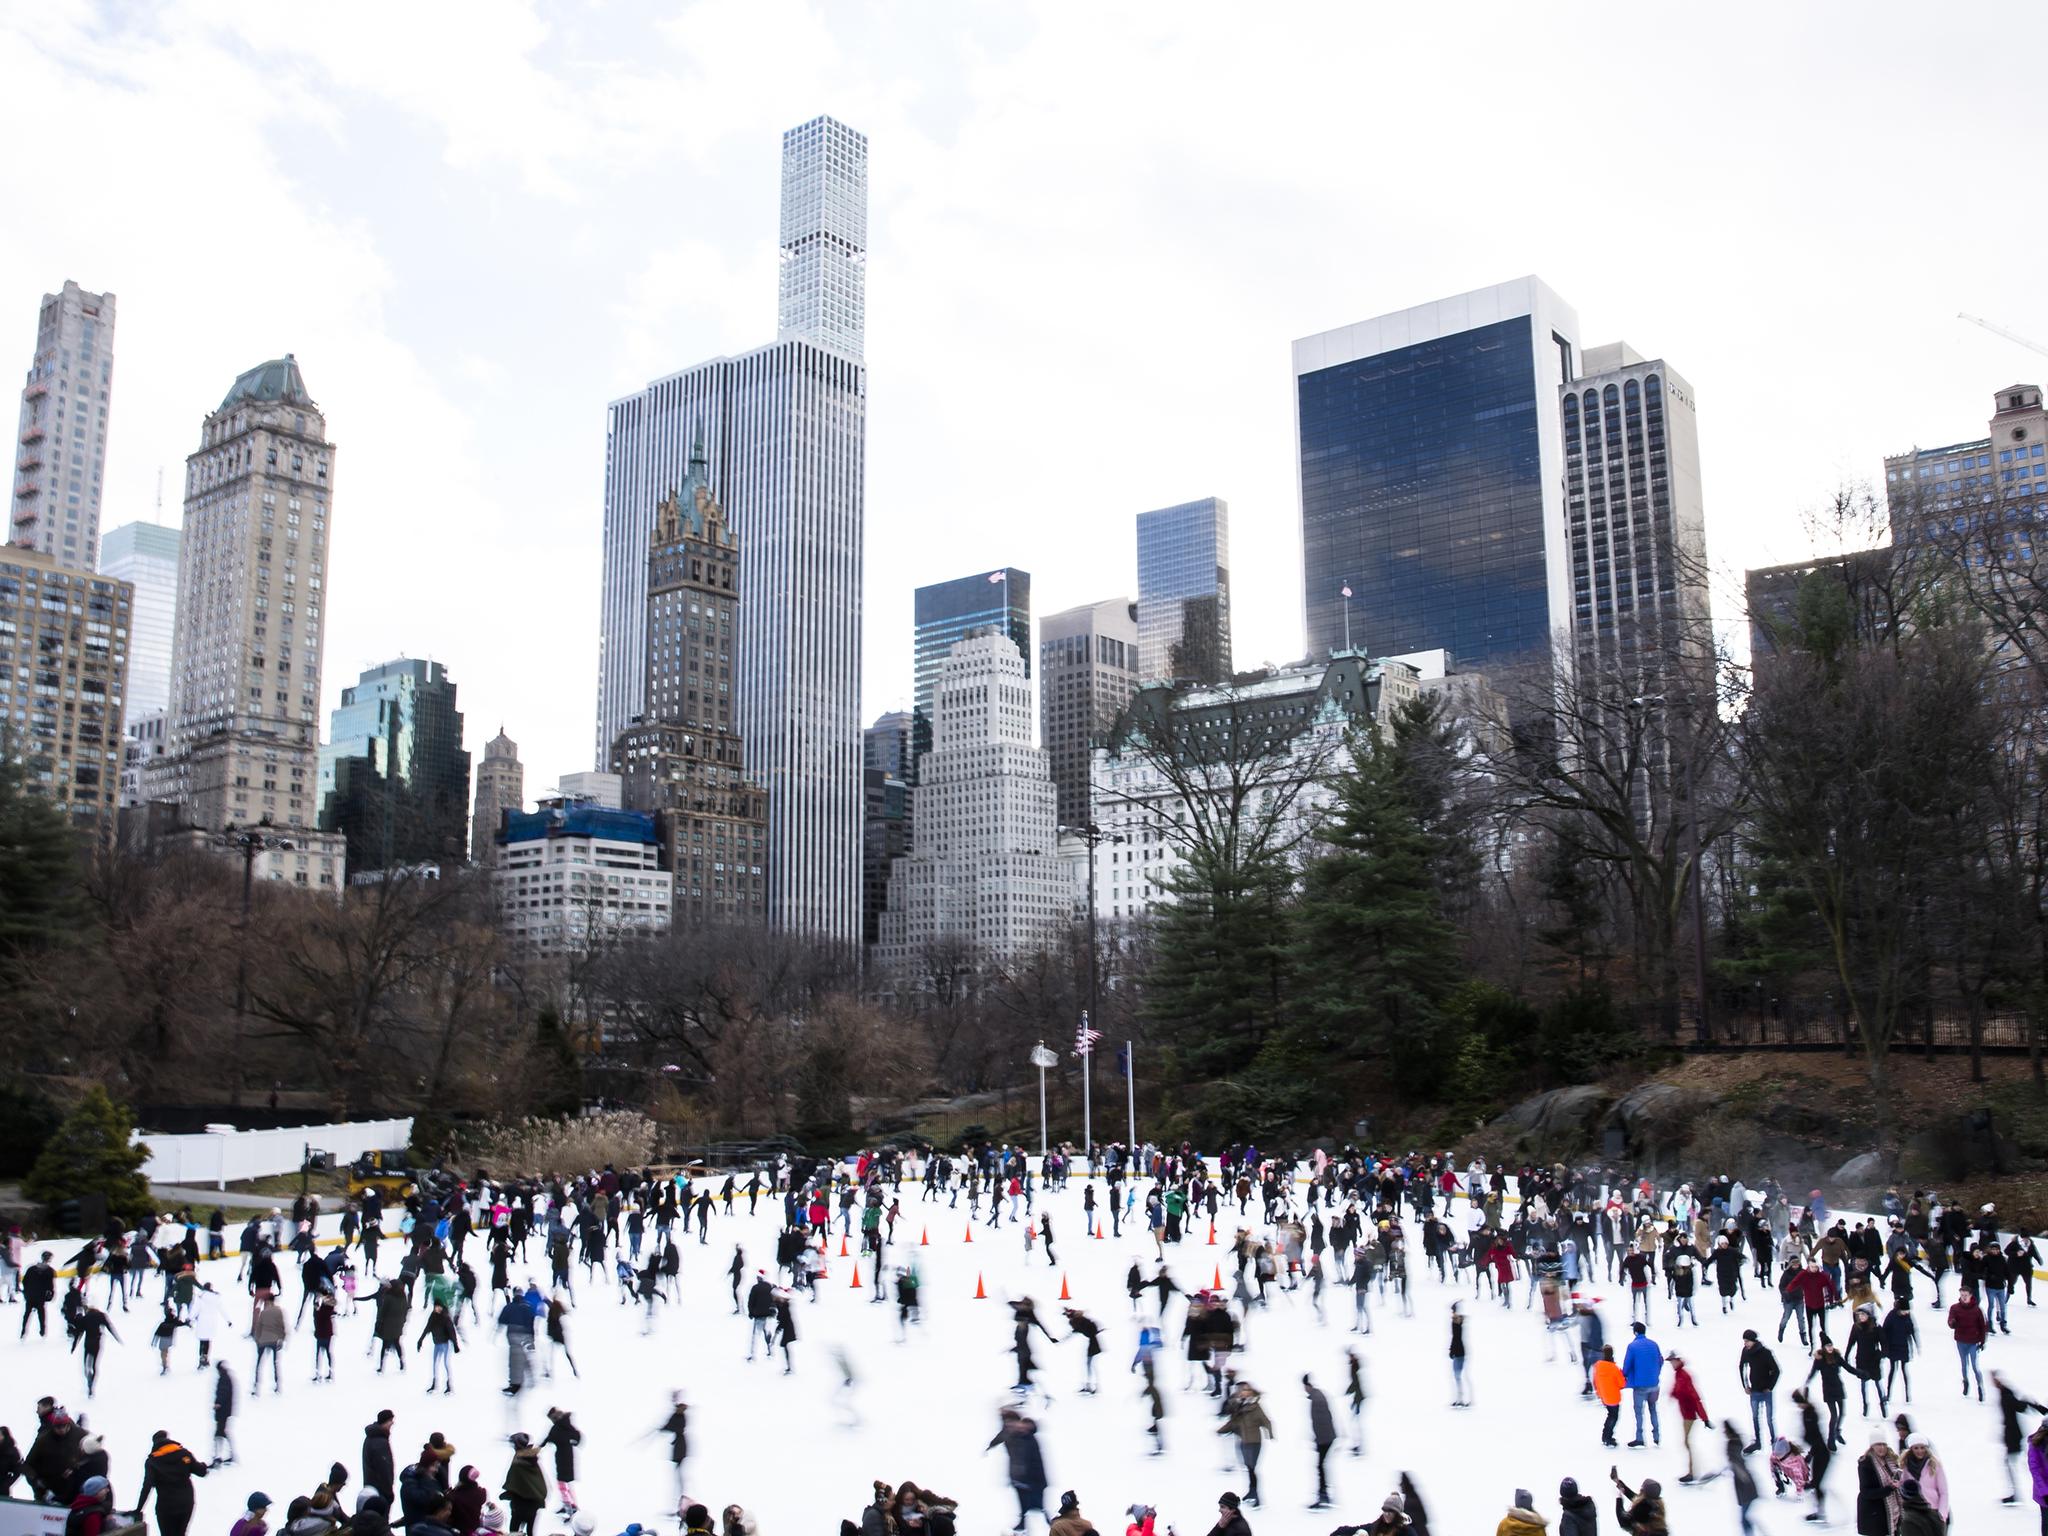 Wollman Rink in Central Park will no longer carry explicit Trump branding